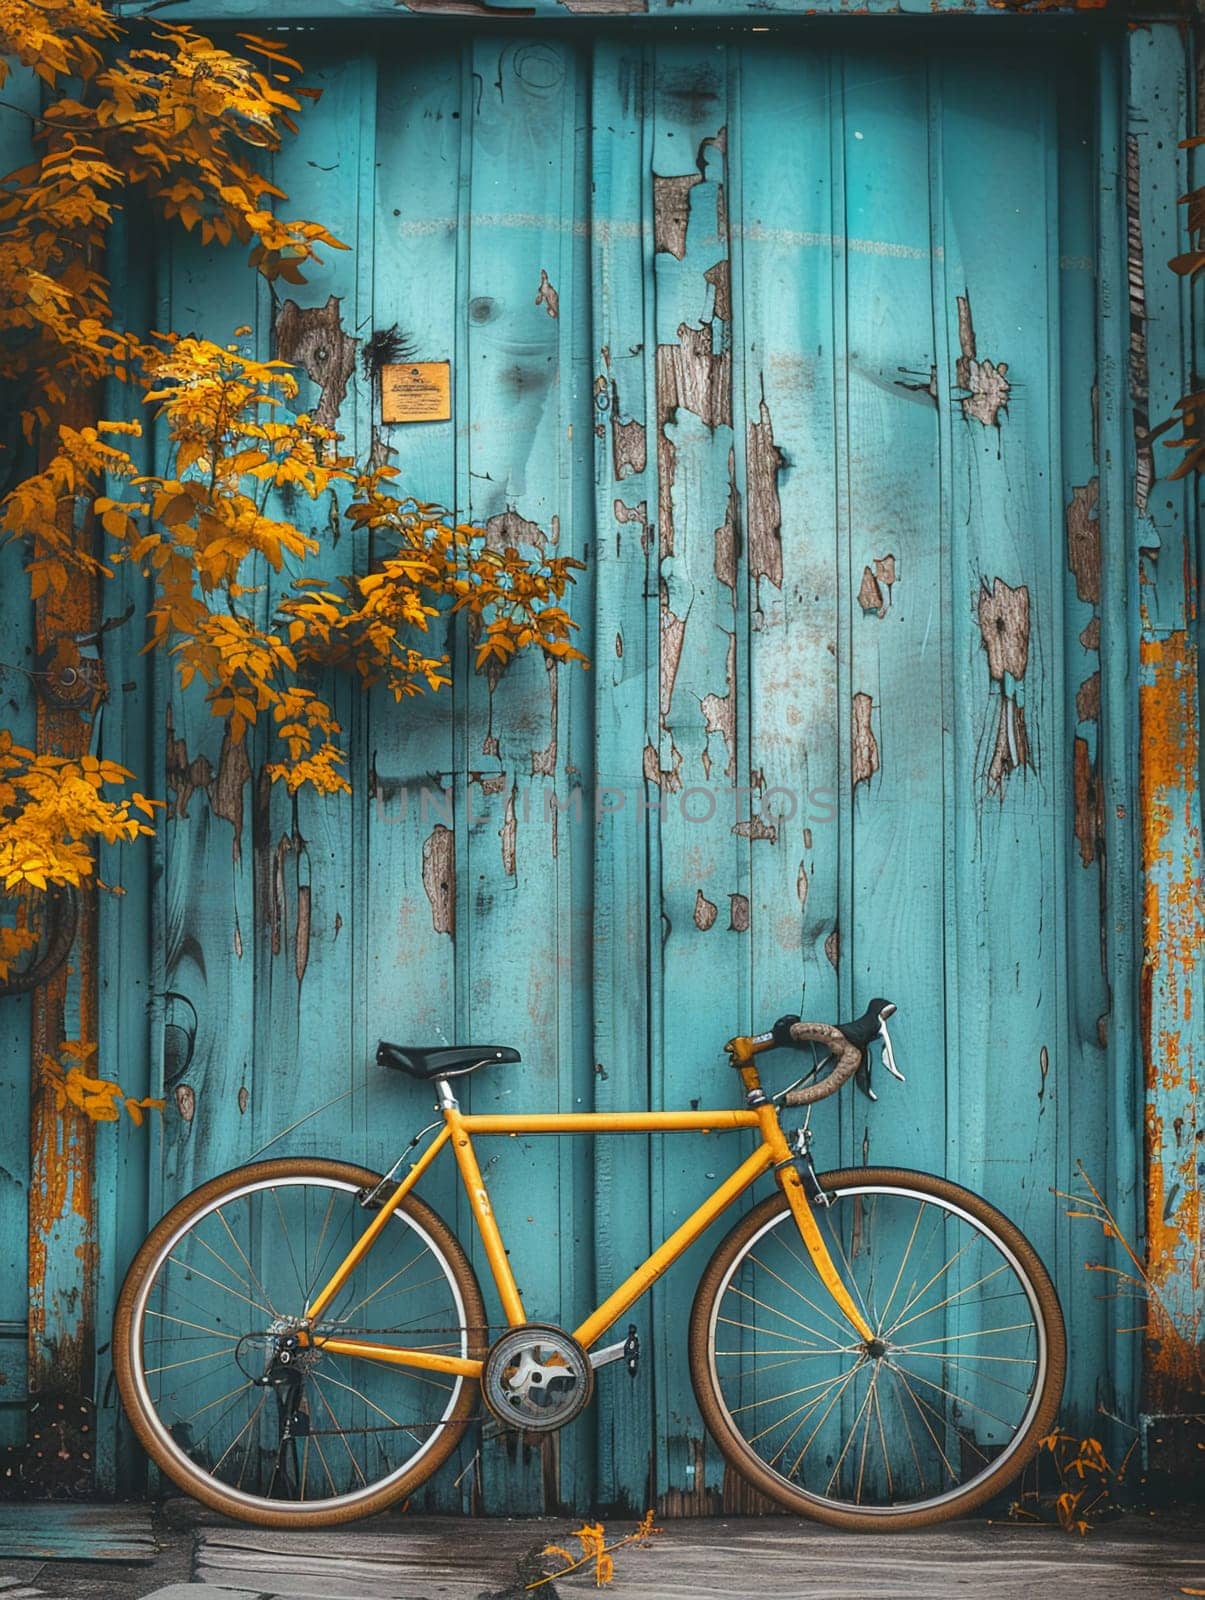 Bicycle leaning against rustic wall by Benzoix